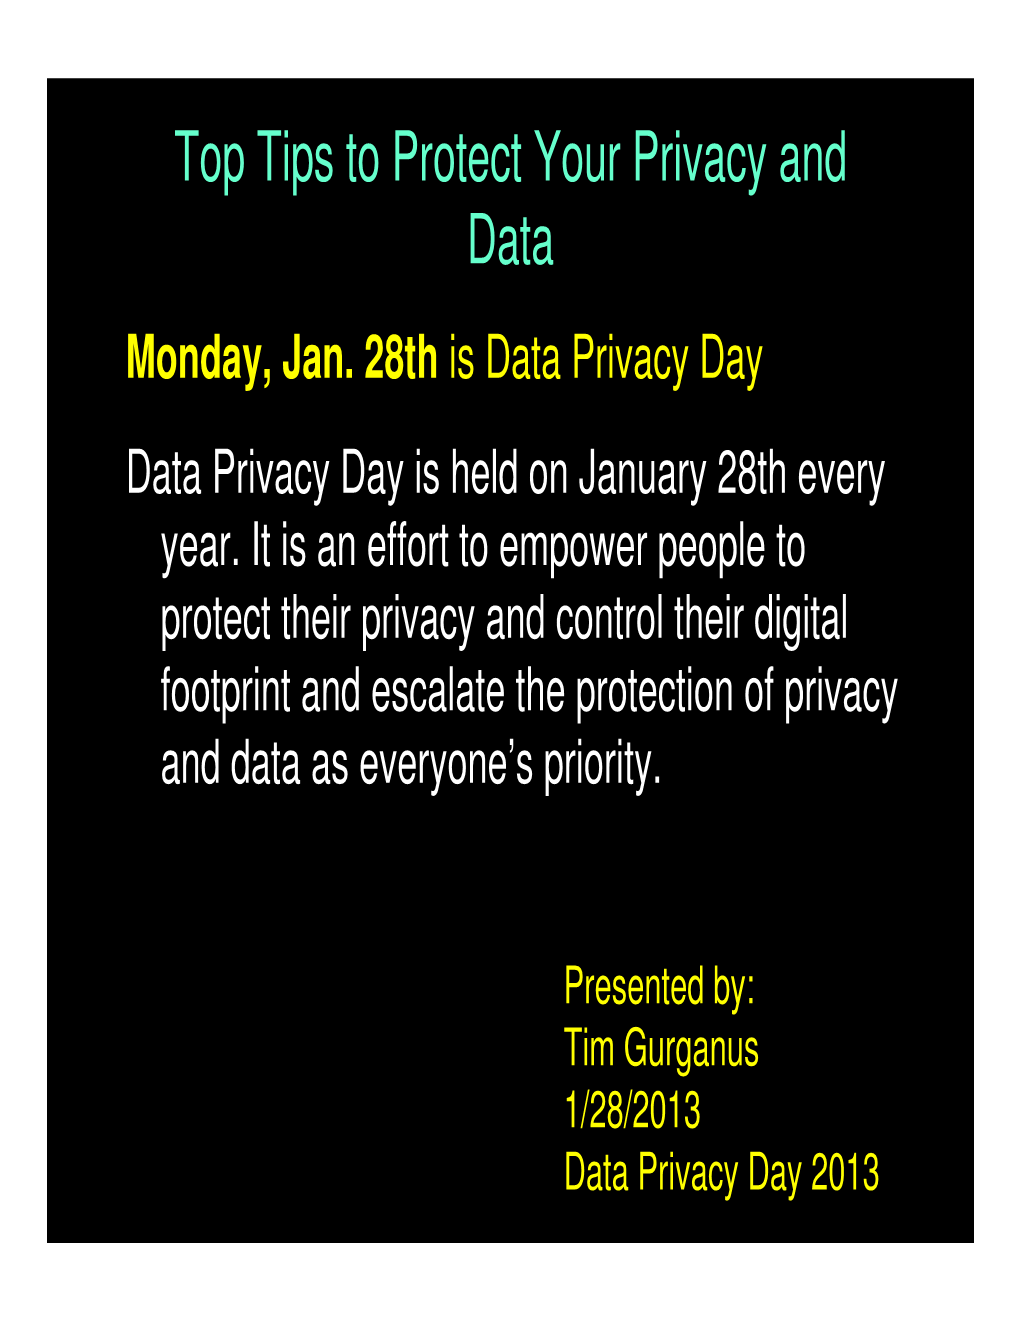 Top Tips to Protect Your Privacy and Data (PDF)